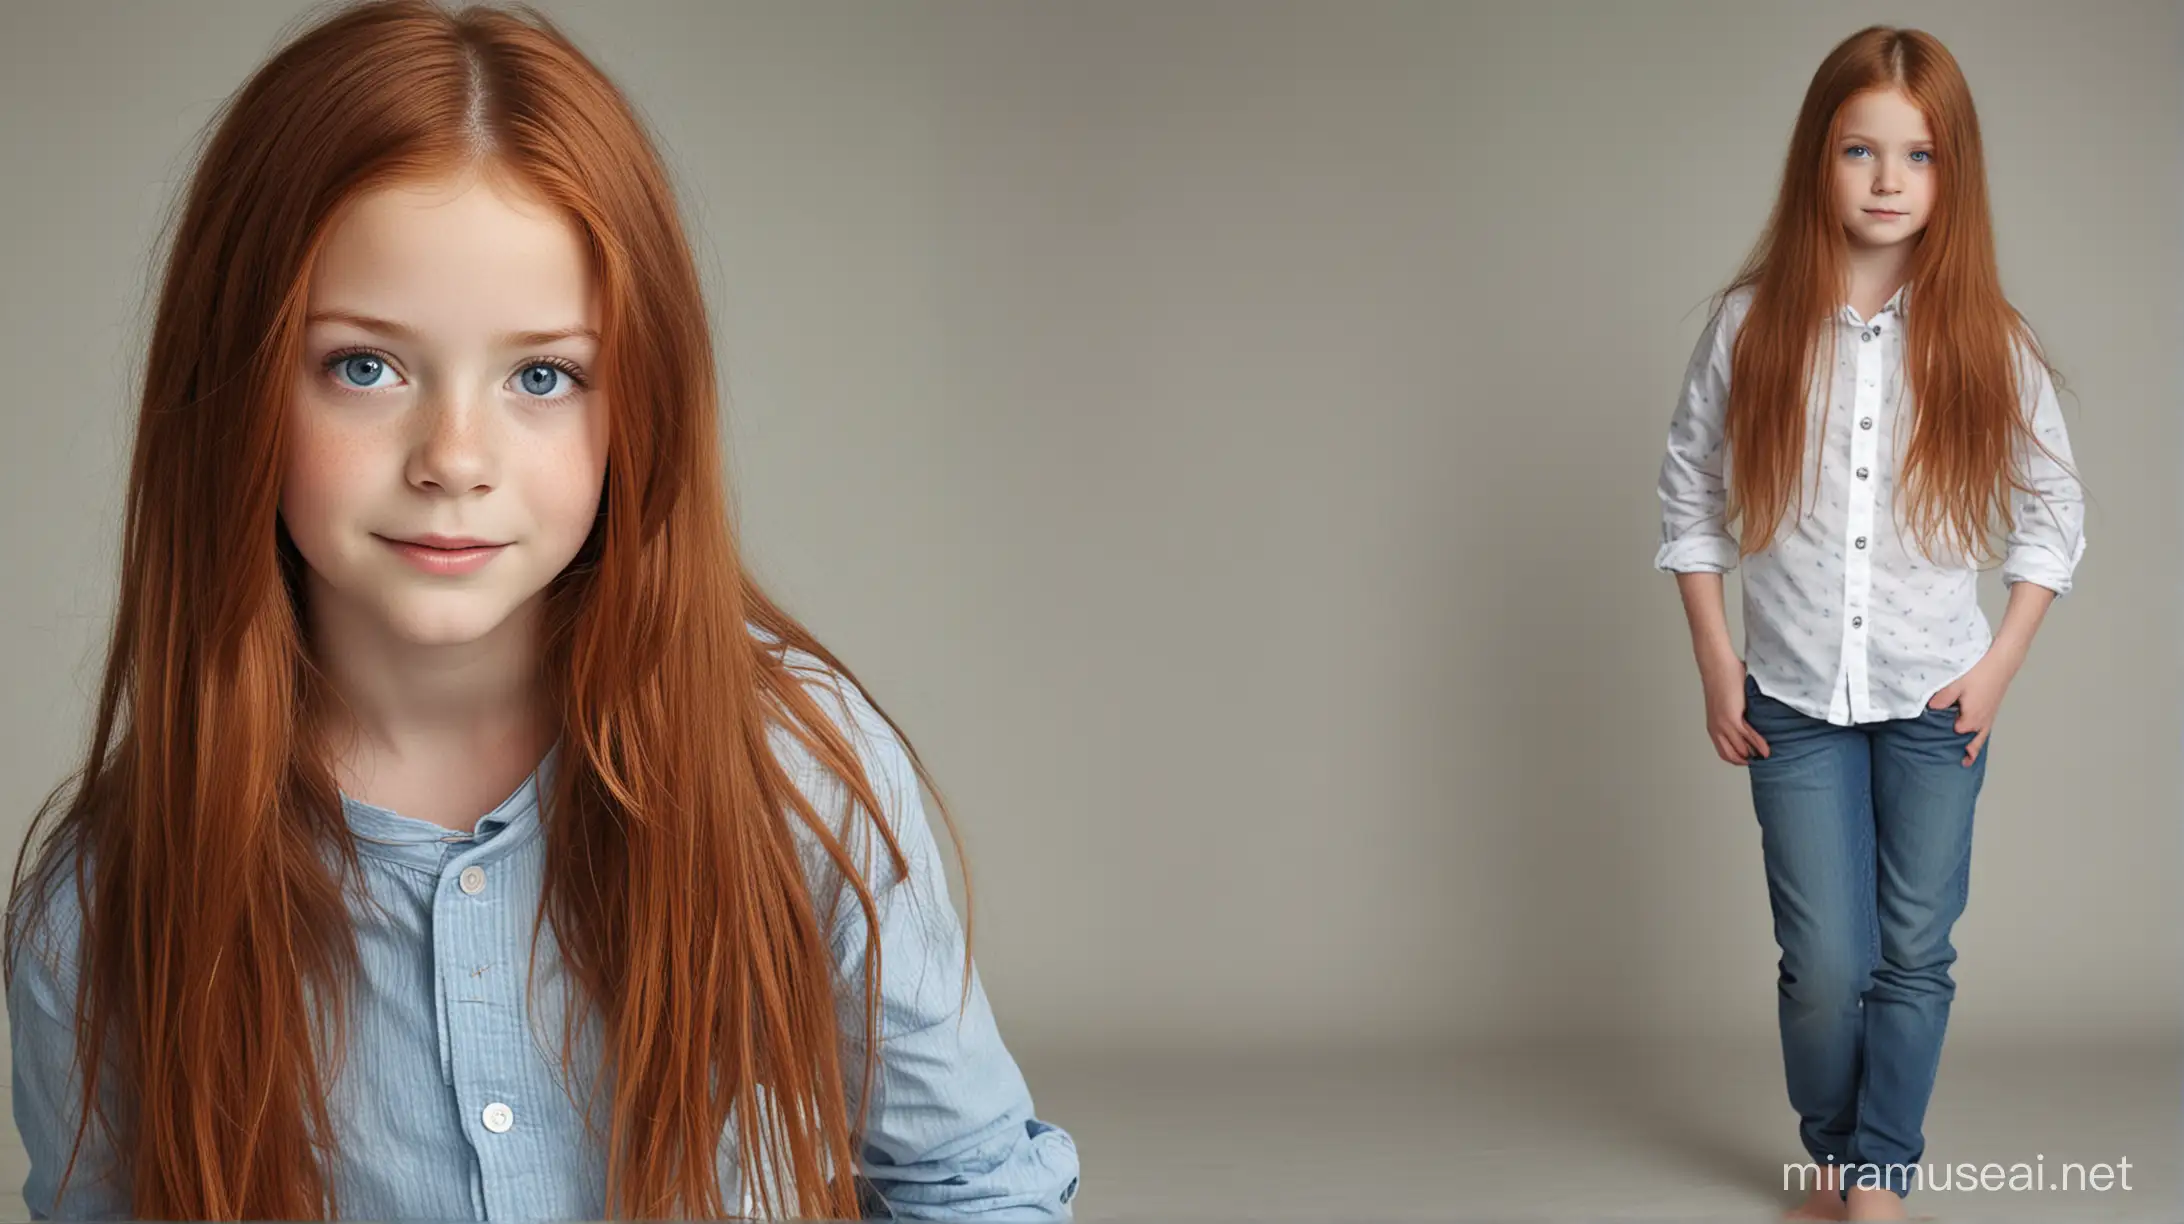 Long red hair and blue eyes 10 years old so cute and pretty girl wearing a long sleeve shirt with a trouser.